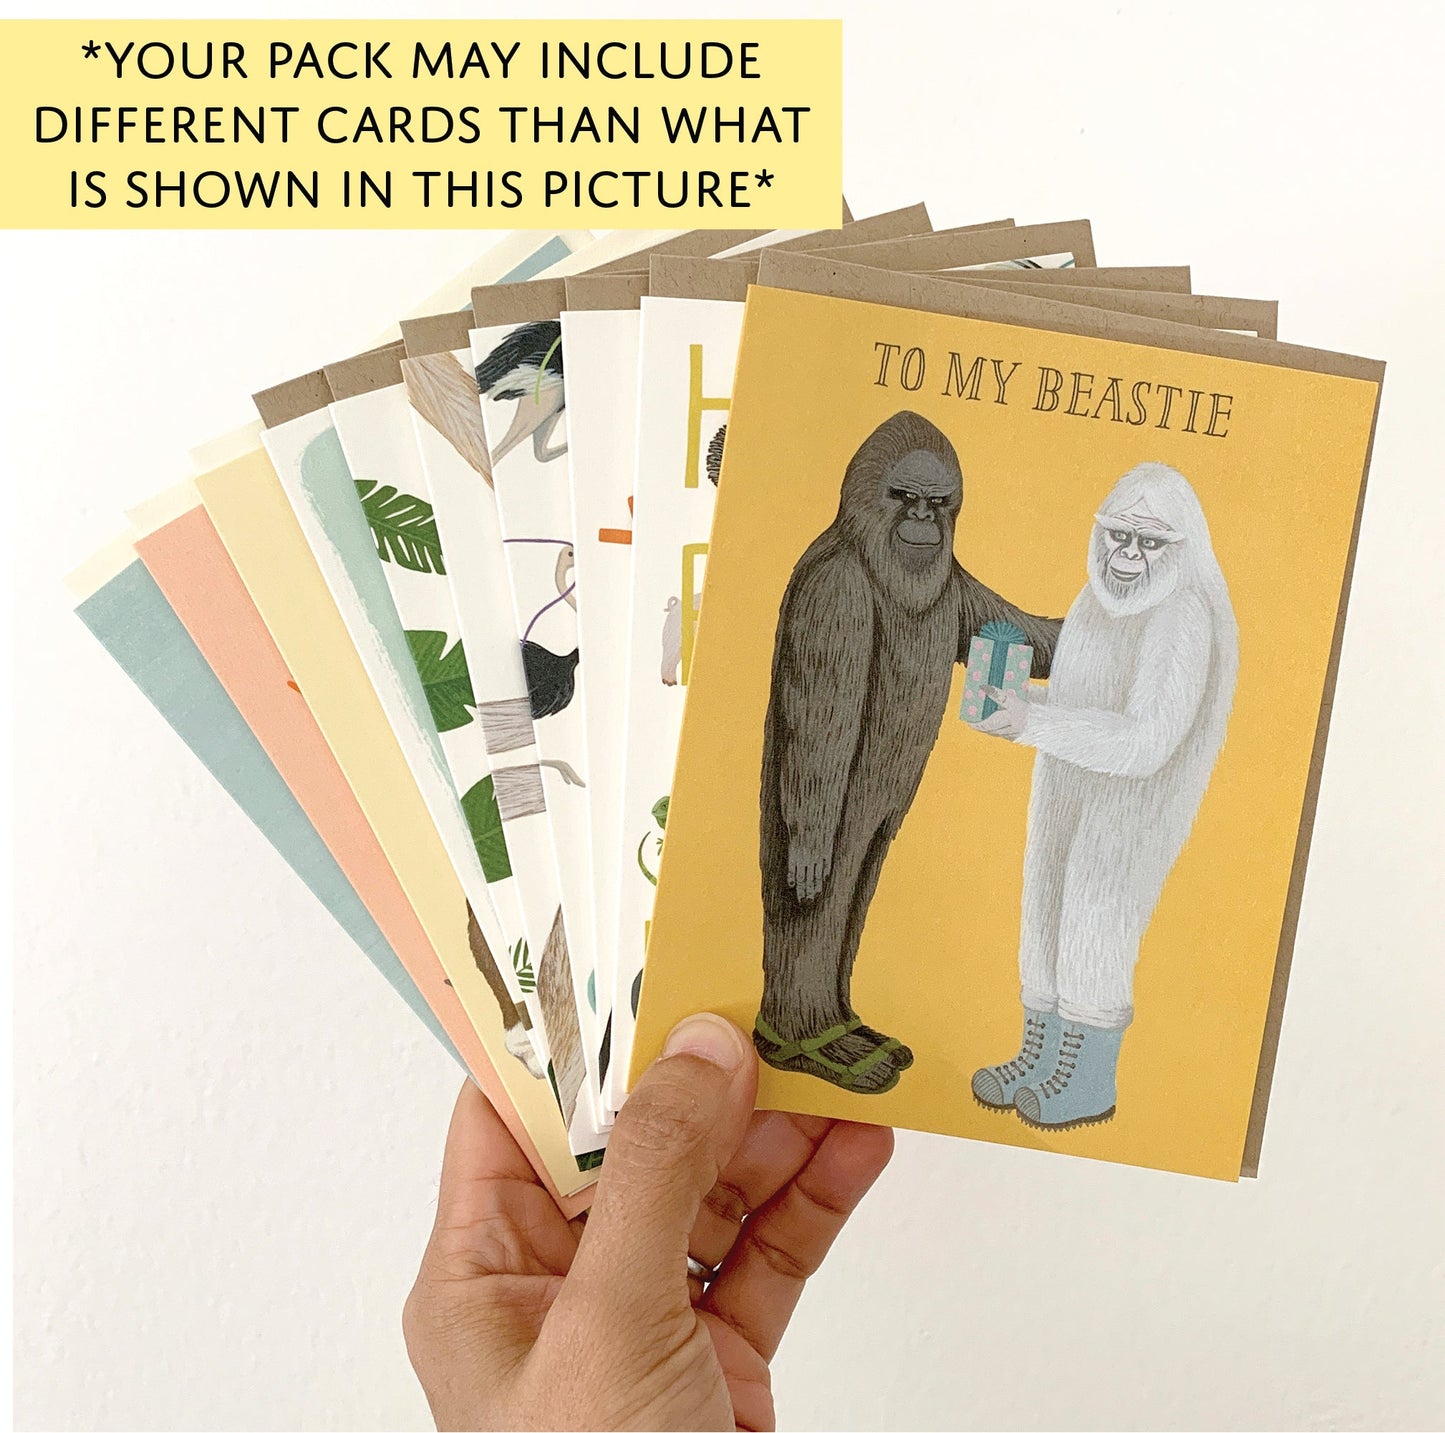 BIRTHDAY SURPRISE PACK OF 10 ASSORTED GREETING CARDS